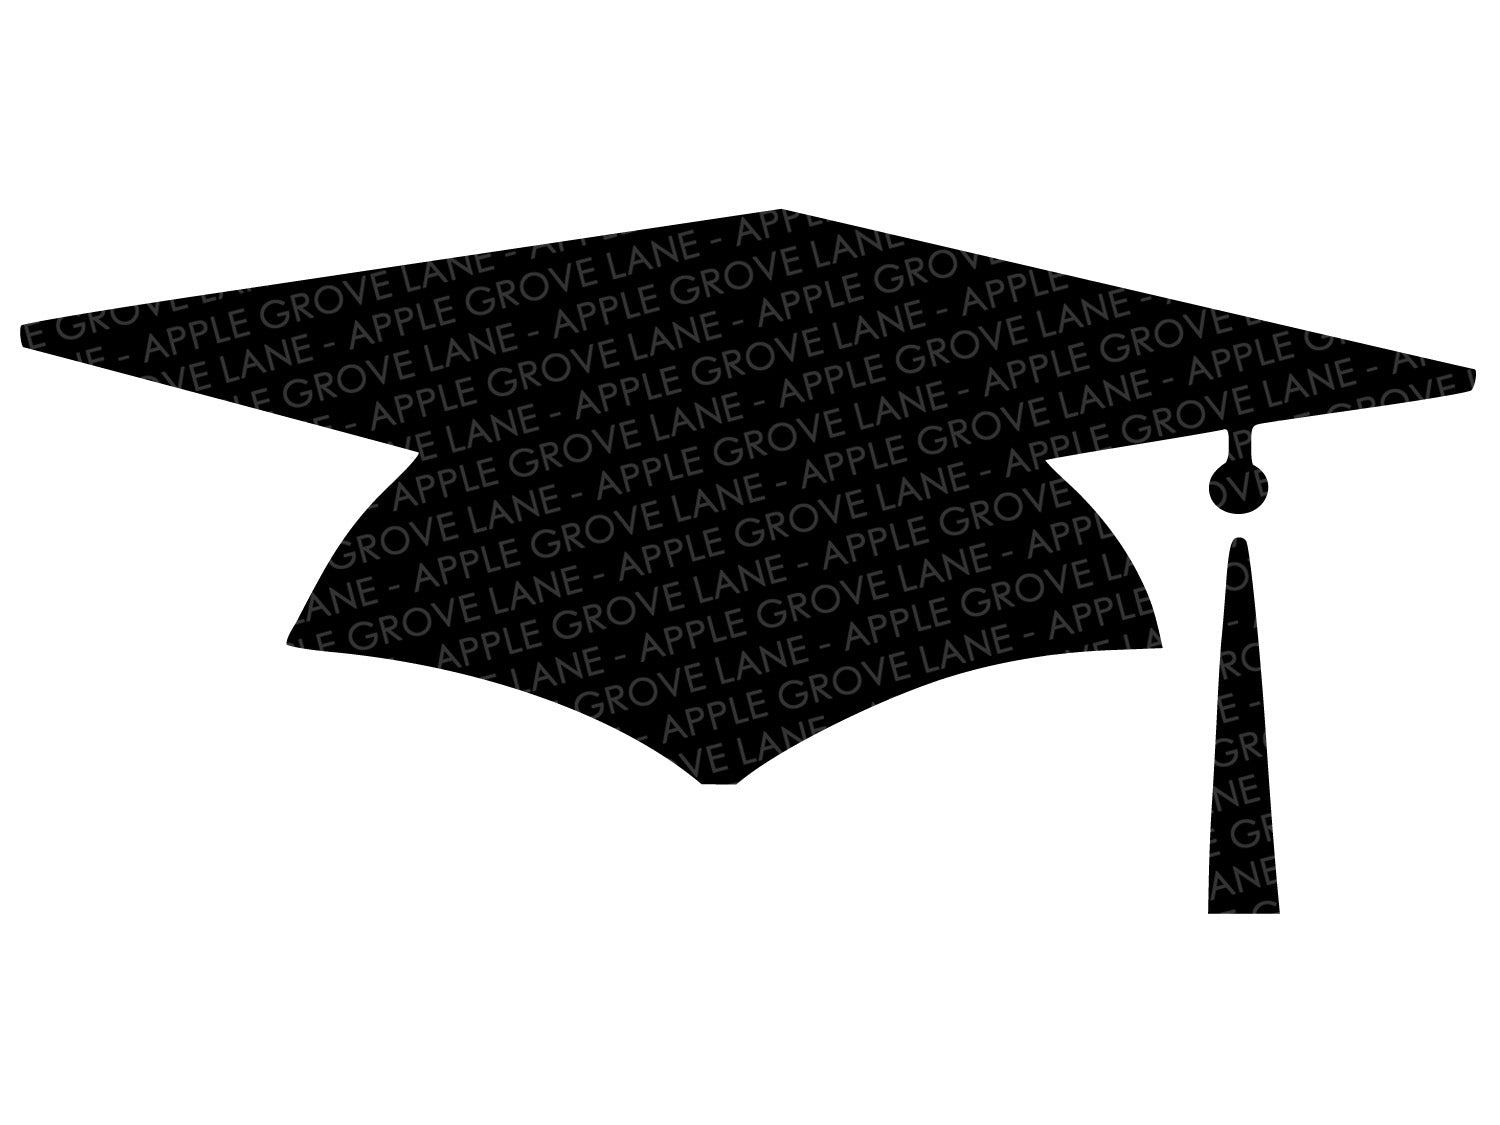 Free Free 318 And So The Adventure Begins Graduation Svg Free SVG PNG EPS DXF File